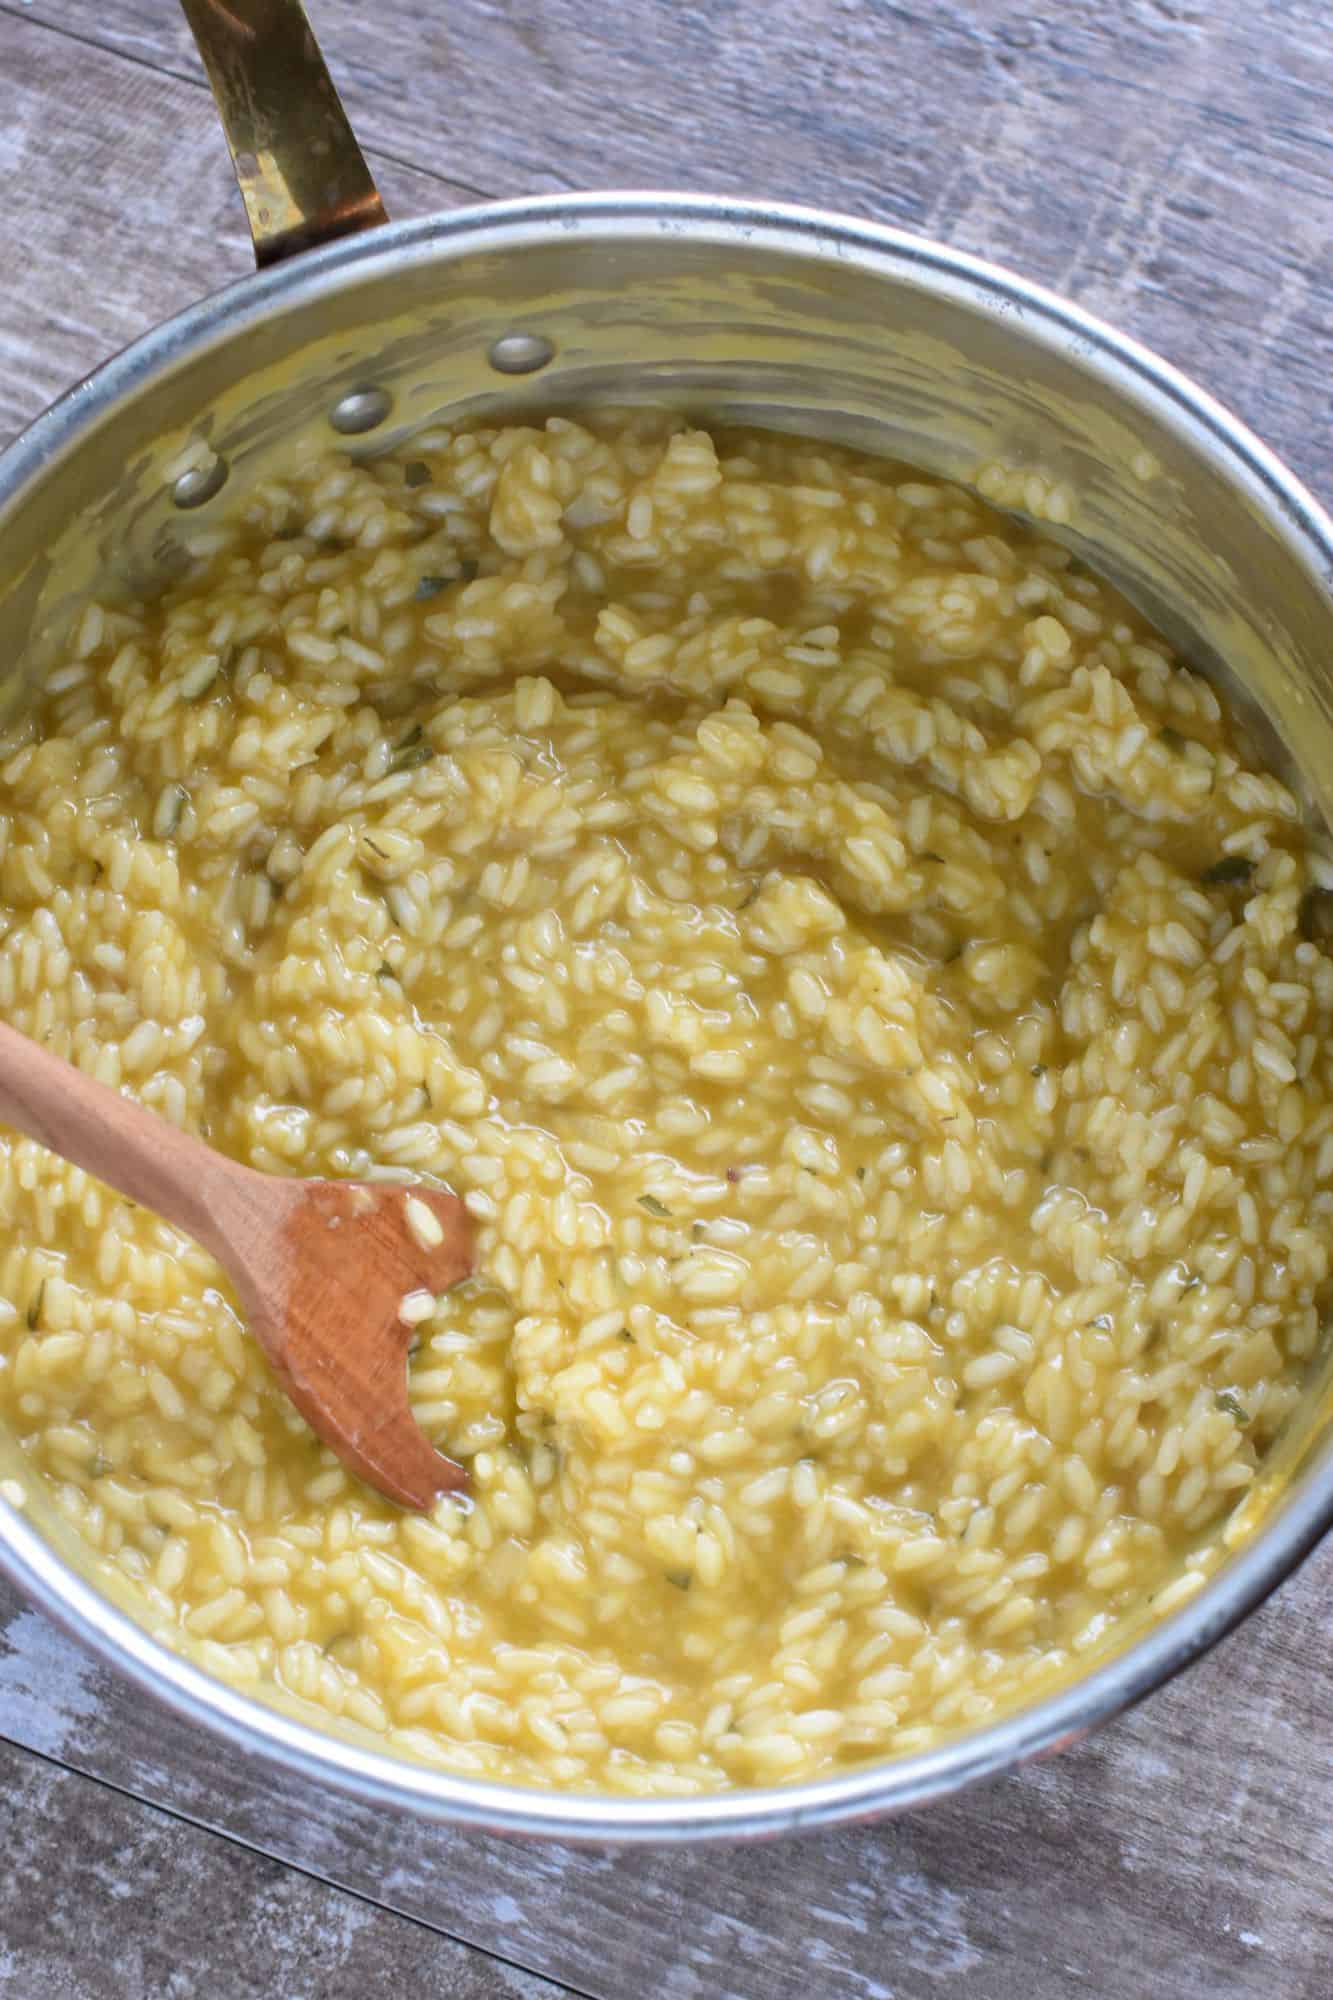 Risotto in pan after adding broth and stirring until creamy